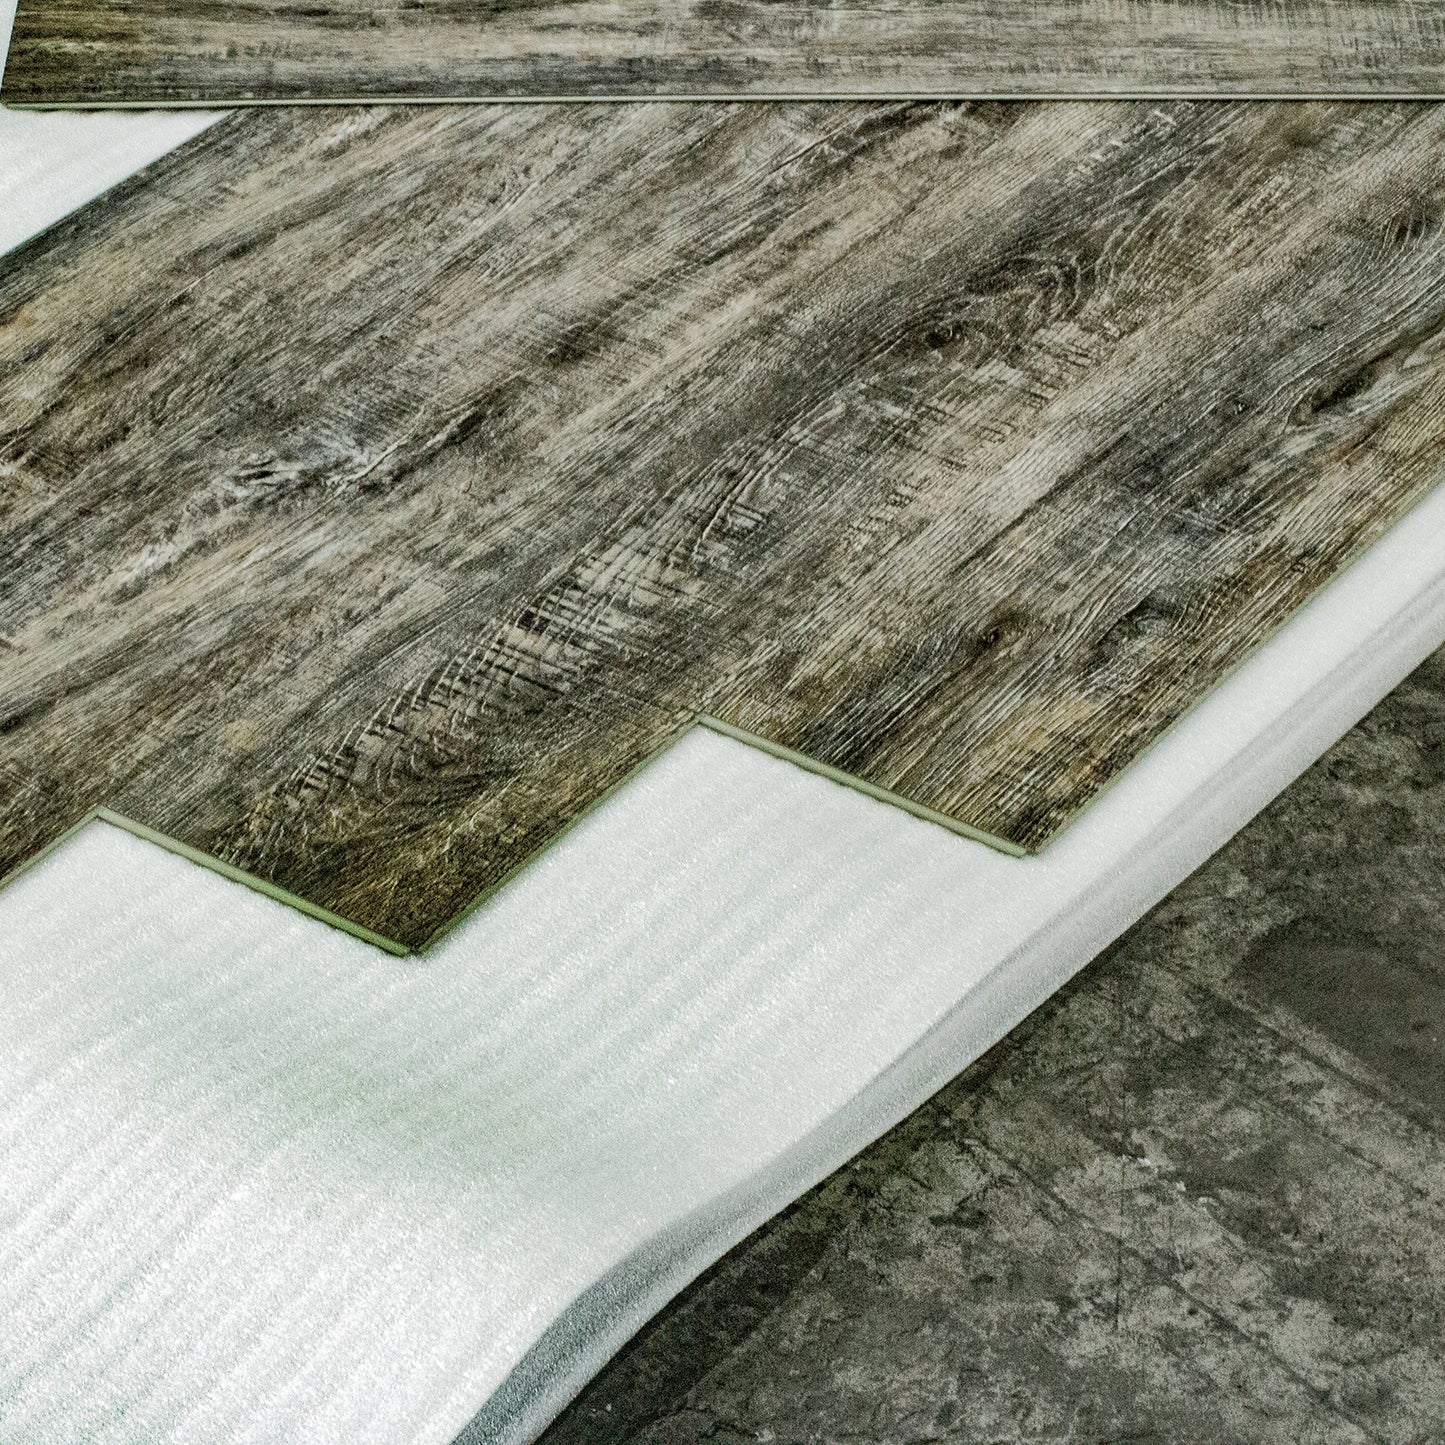 3mm 100sqm Silver Acoustic Underlay  Wood or Laminate Flooring Comfort Insulation